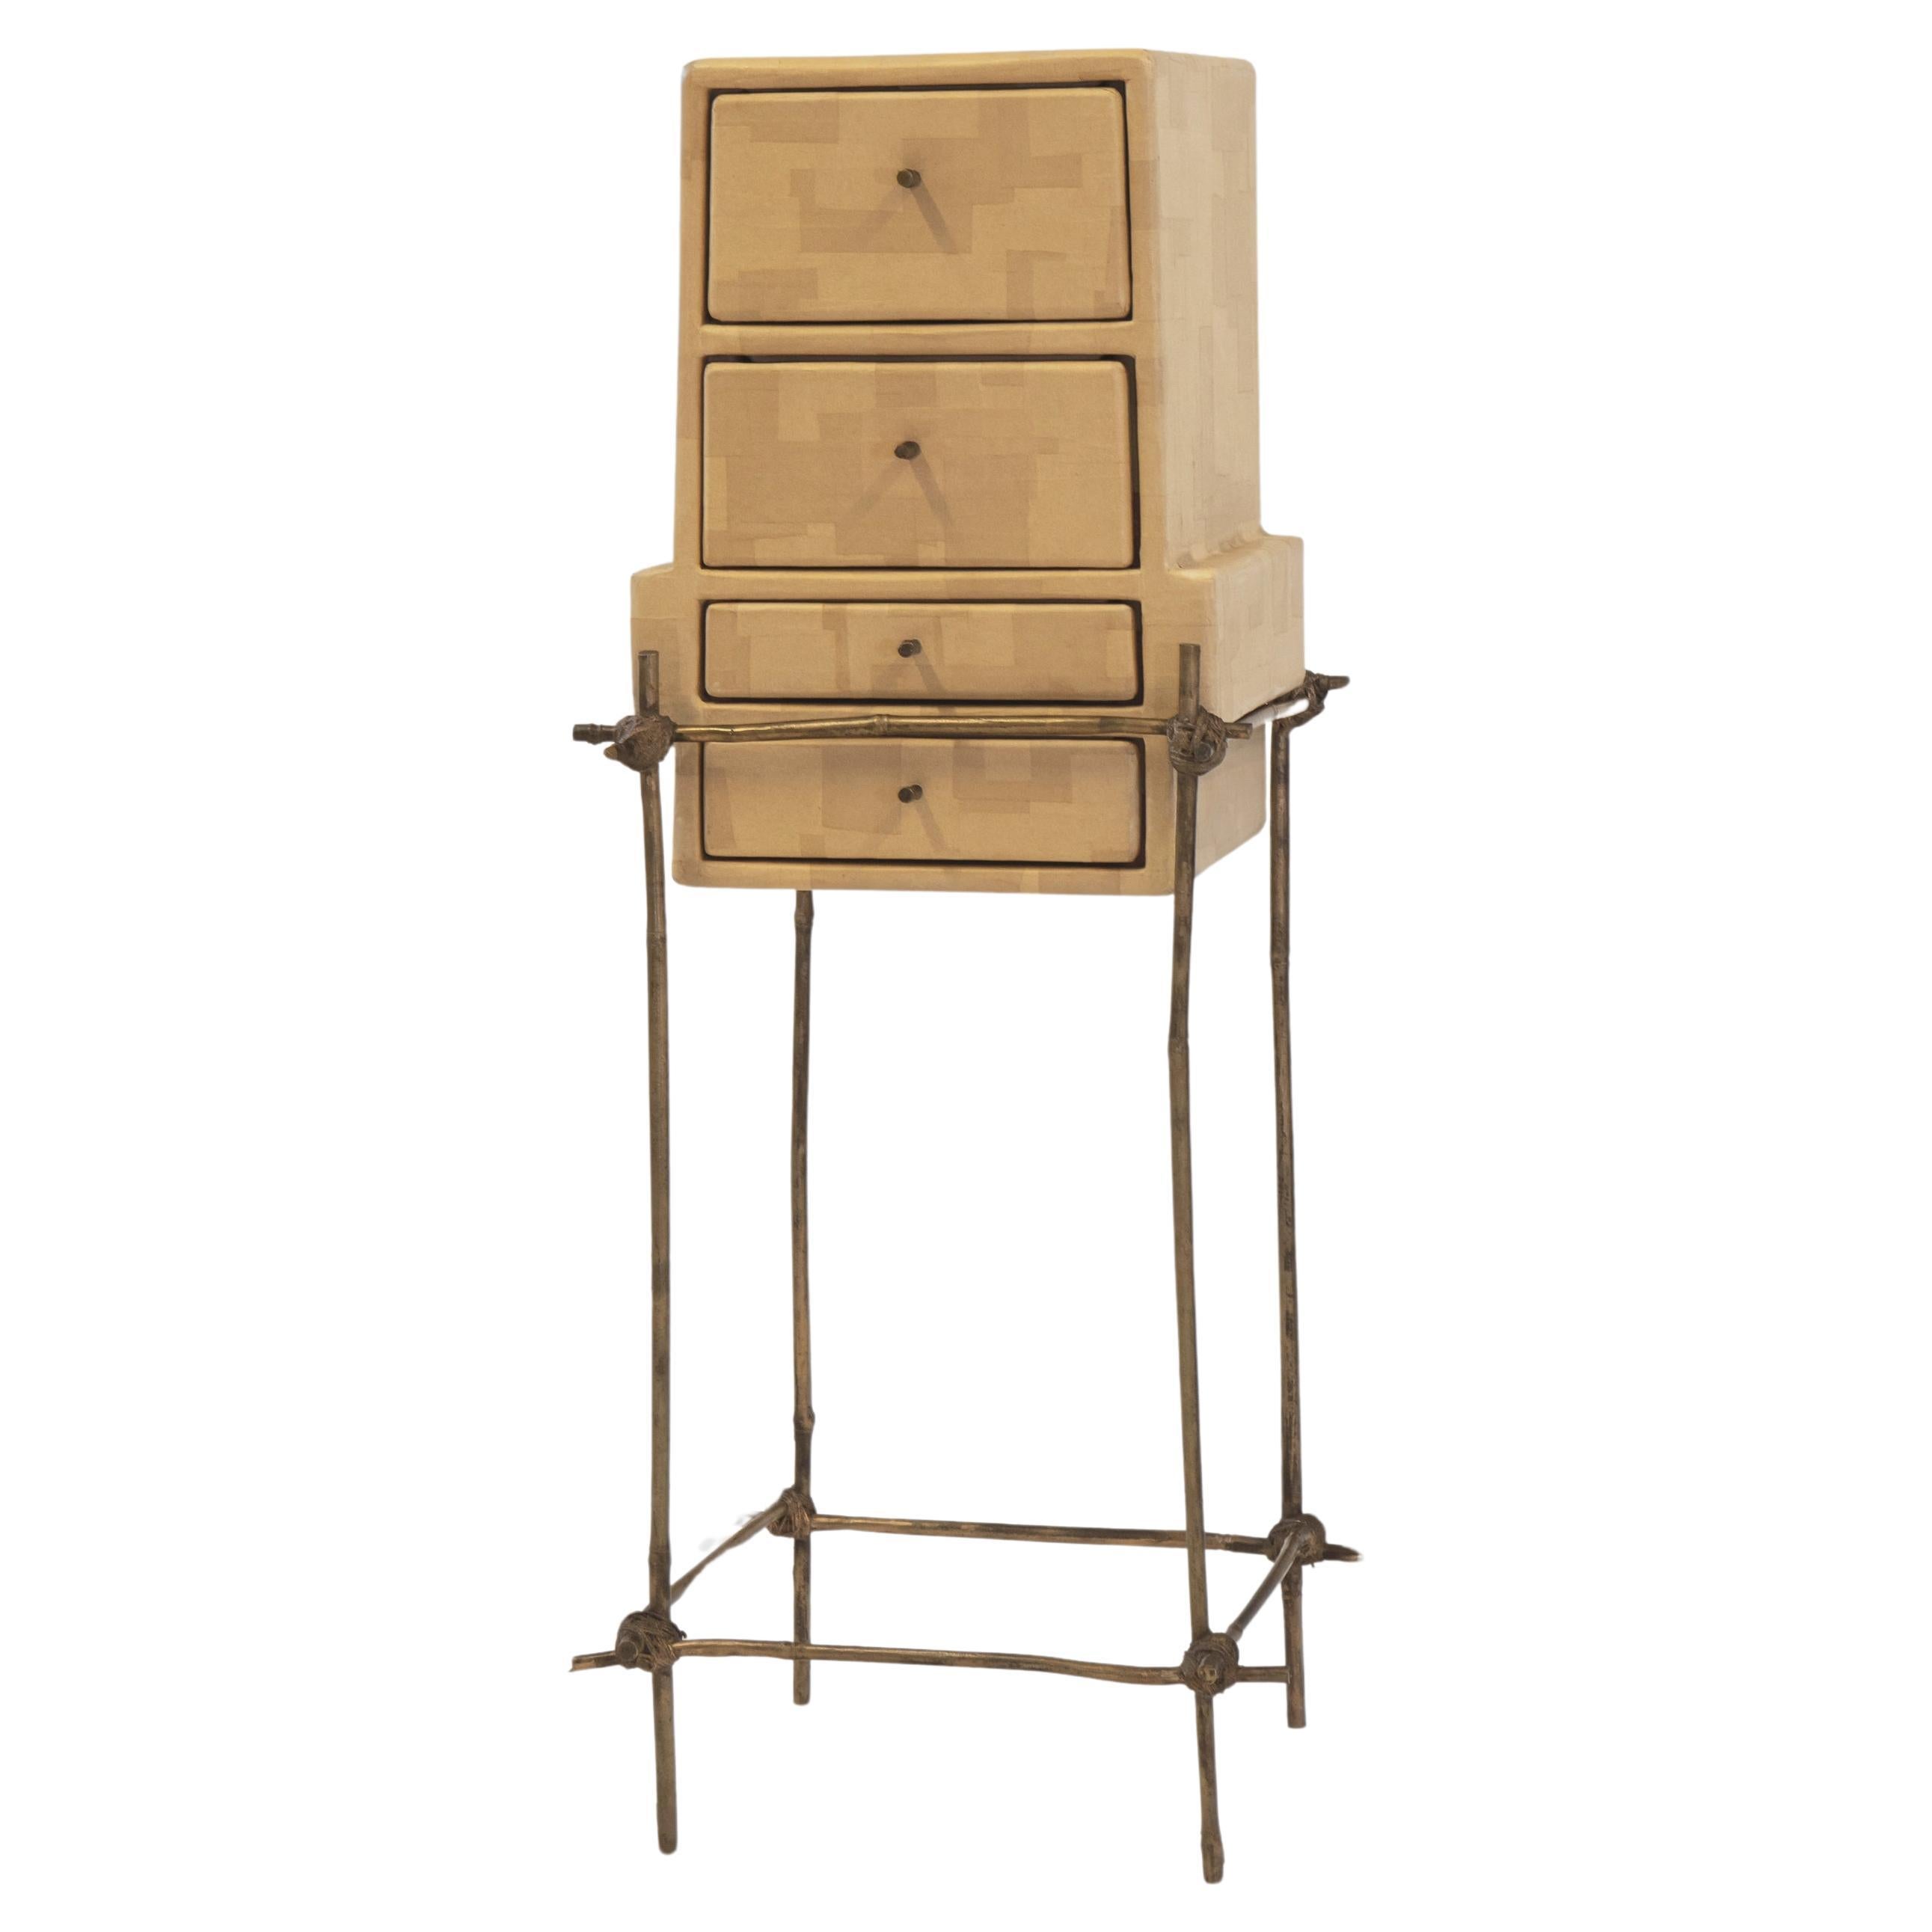 Studio Glithero Ad Hoc Cabinet On Gilt Bronze Bamboo Stand Les French Series 1 For Sale